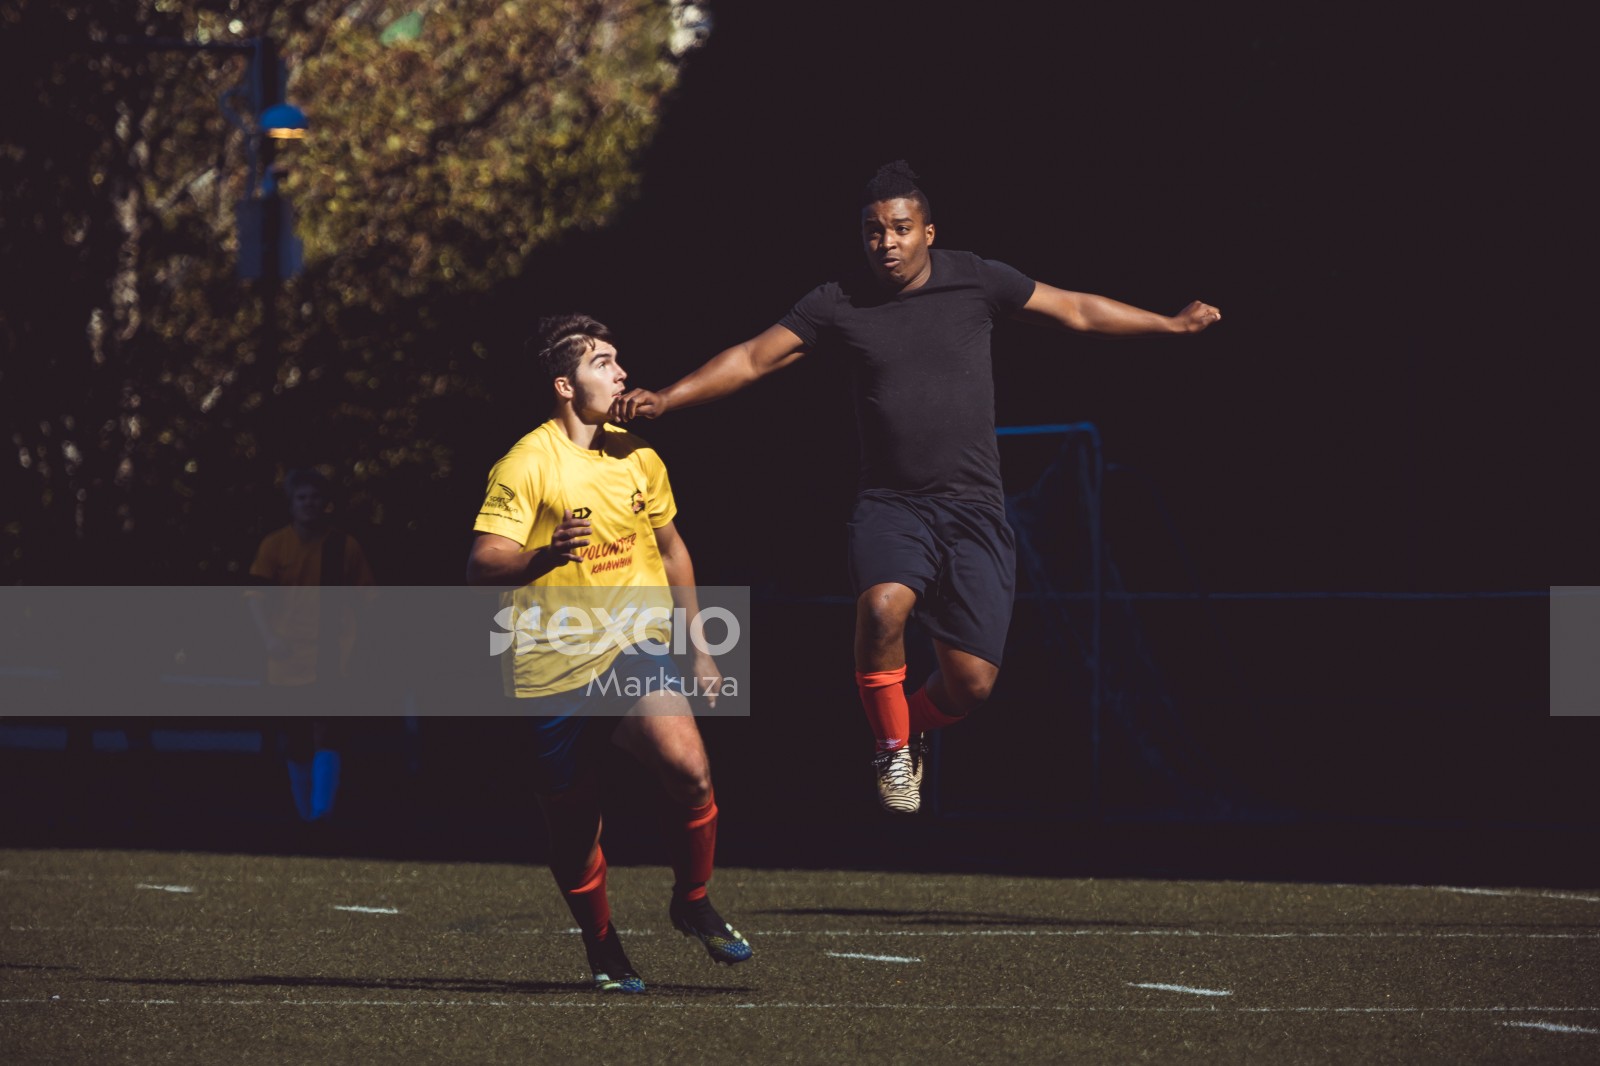 Football player jumps while running - Sports Zone sunday league